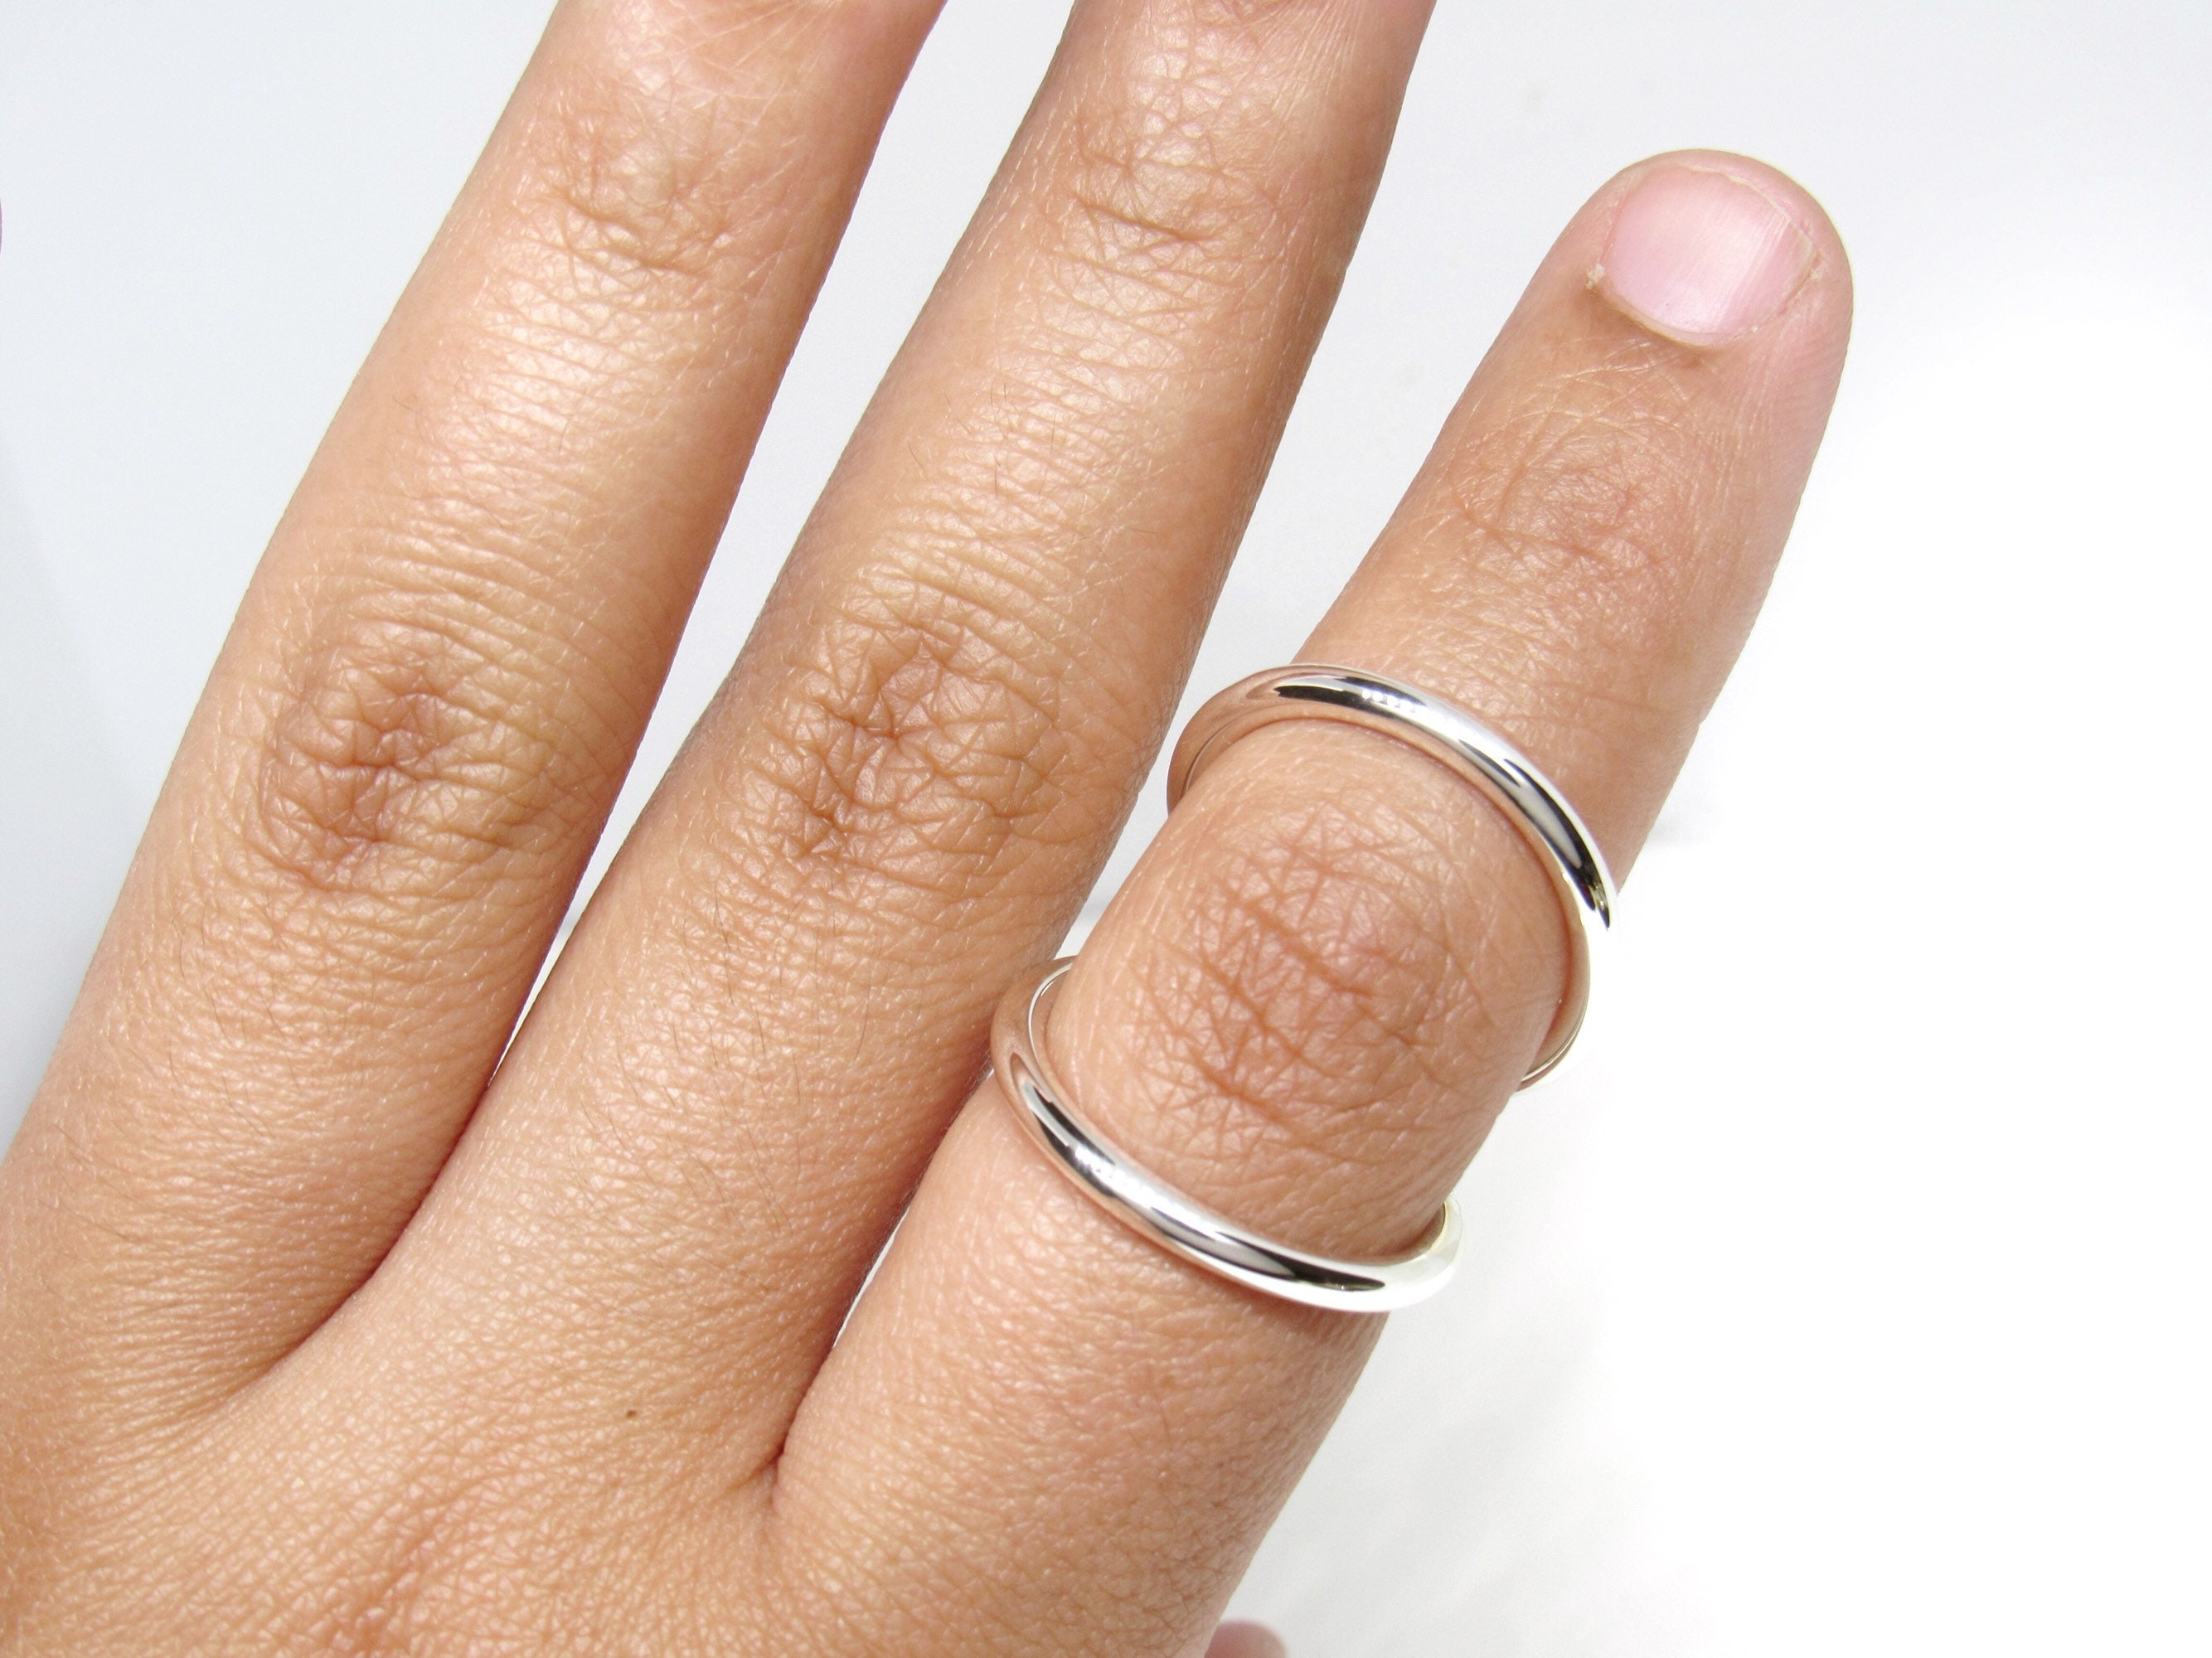 Arthritic Rings - Guide To Stretch Rings For Arthritic Fingers